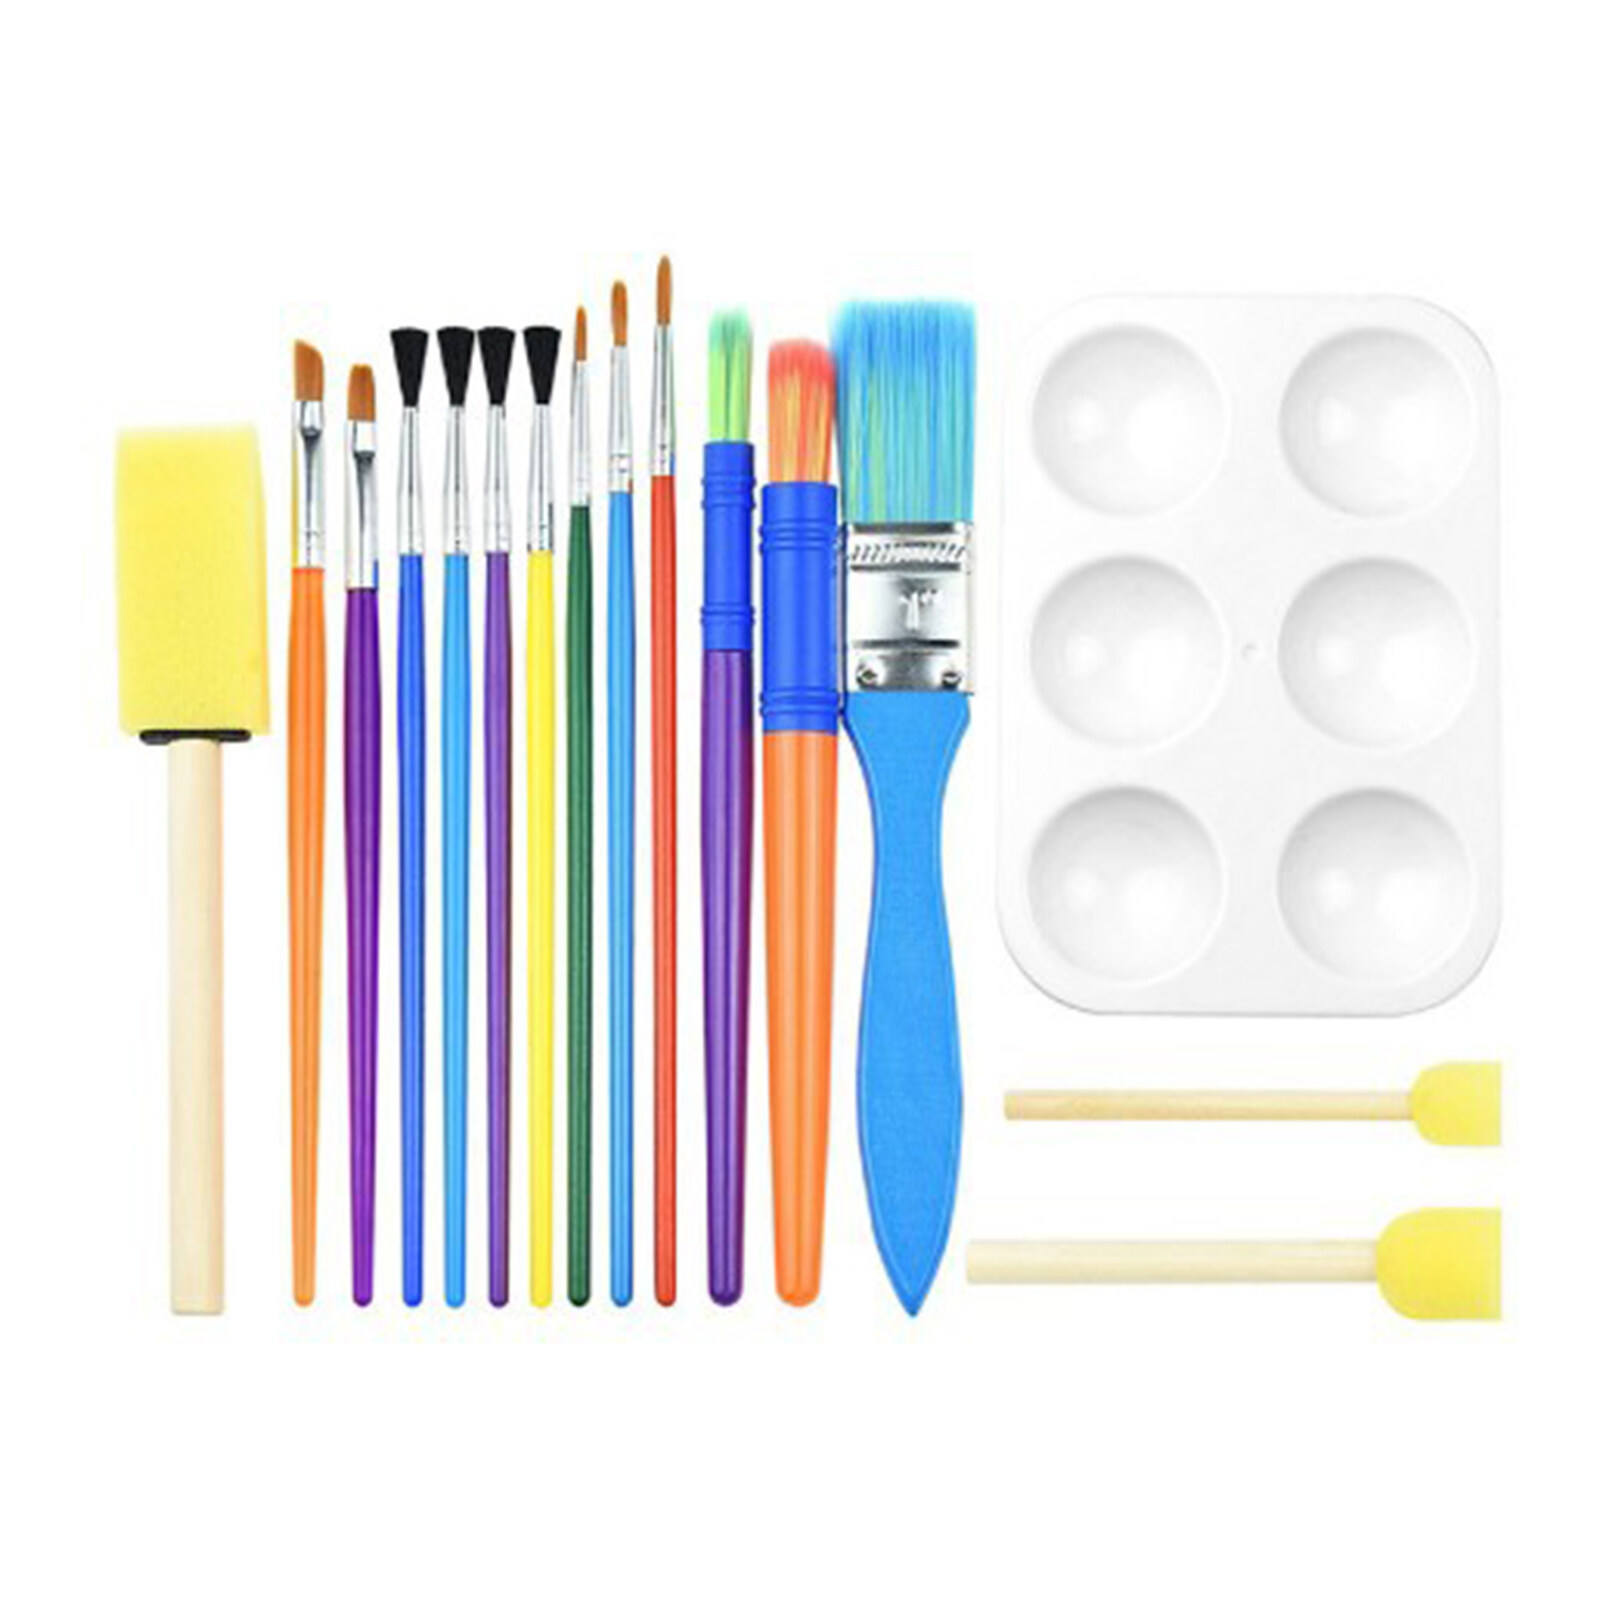 Kids Sponge Painting Brushes 26 Pieces Kids Art & Craft Painting Supply Brushes Sponge Paint Brush Toy Drawing Set for Children Early Education 